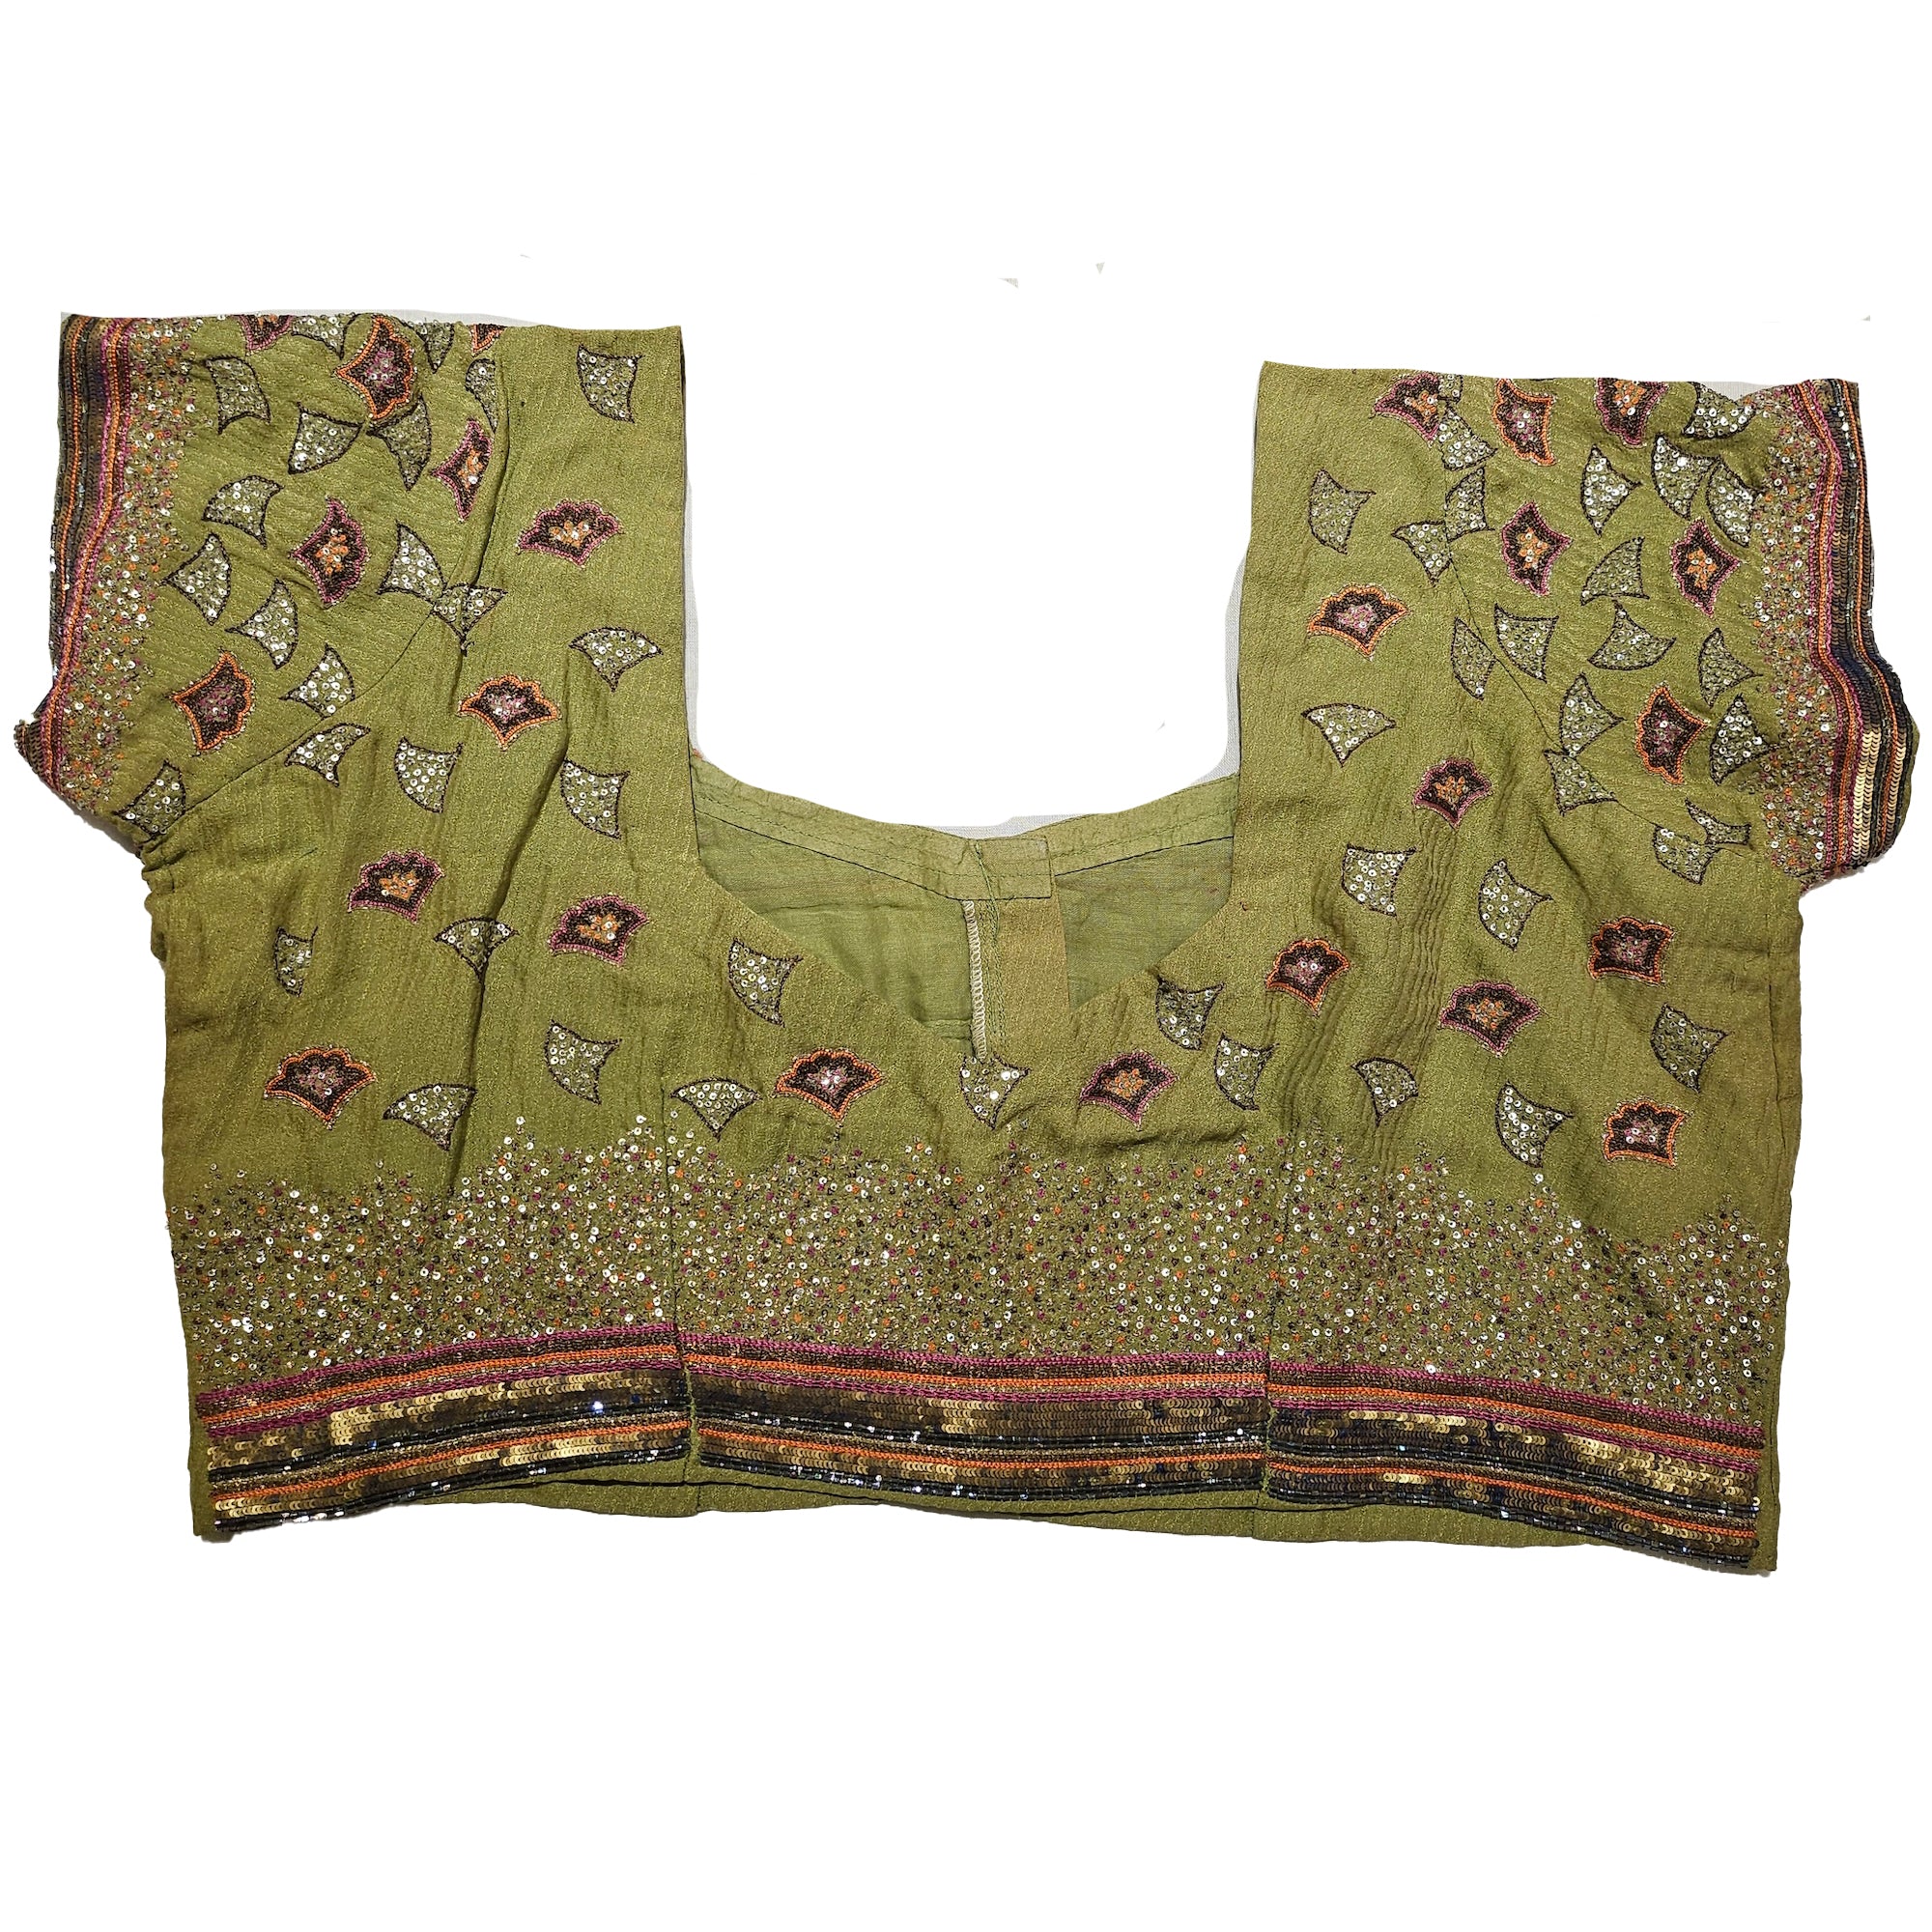 Brocade & Embroidered Saree Blouses -Size 40 - Vintage India NYC